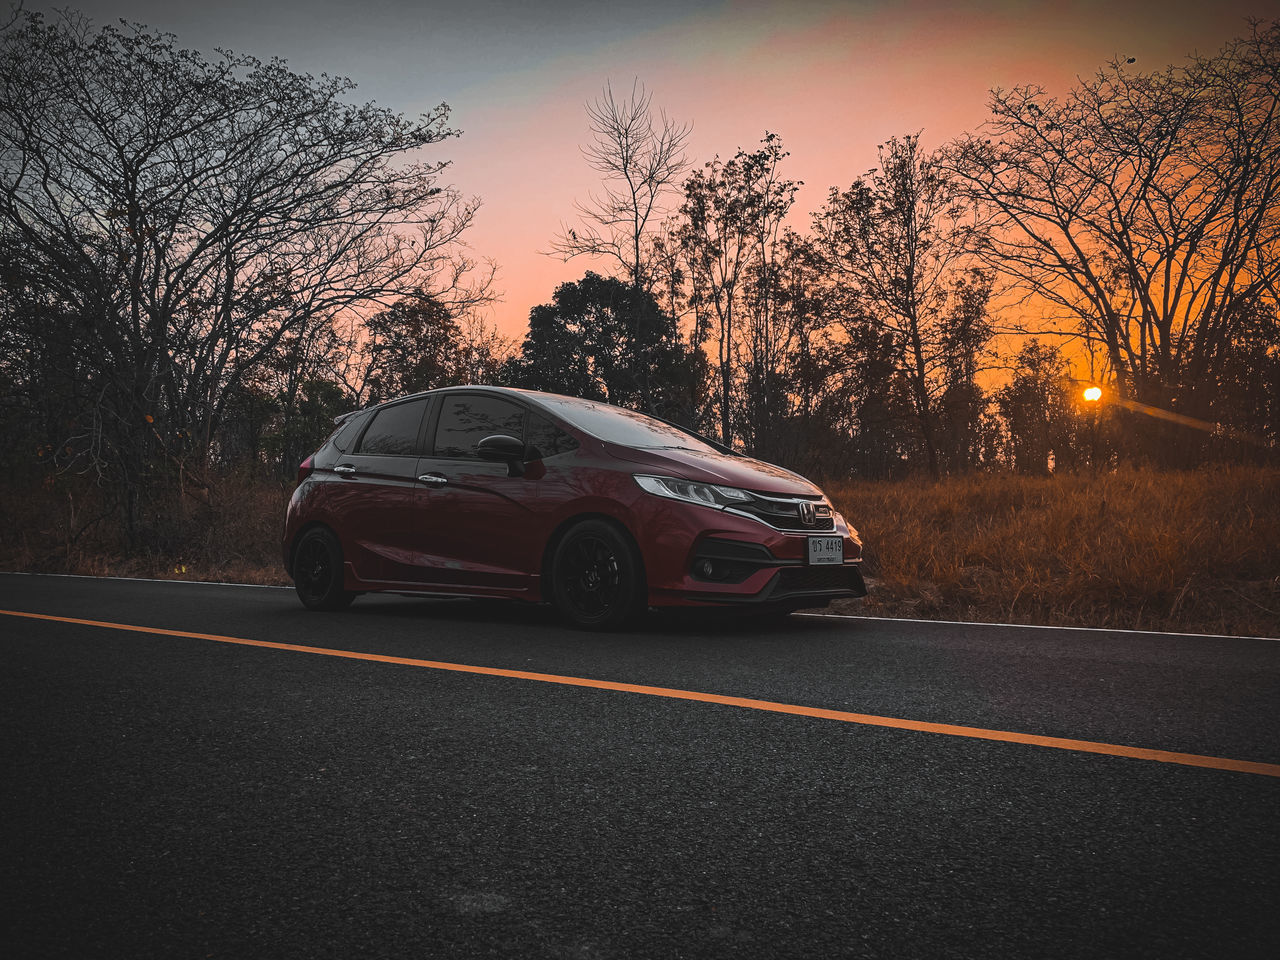 CAR ON ROAD AT SUNSET